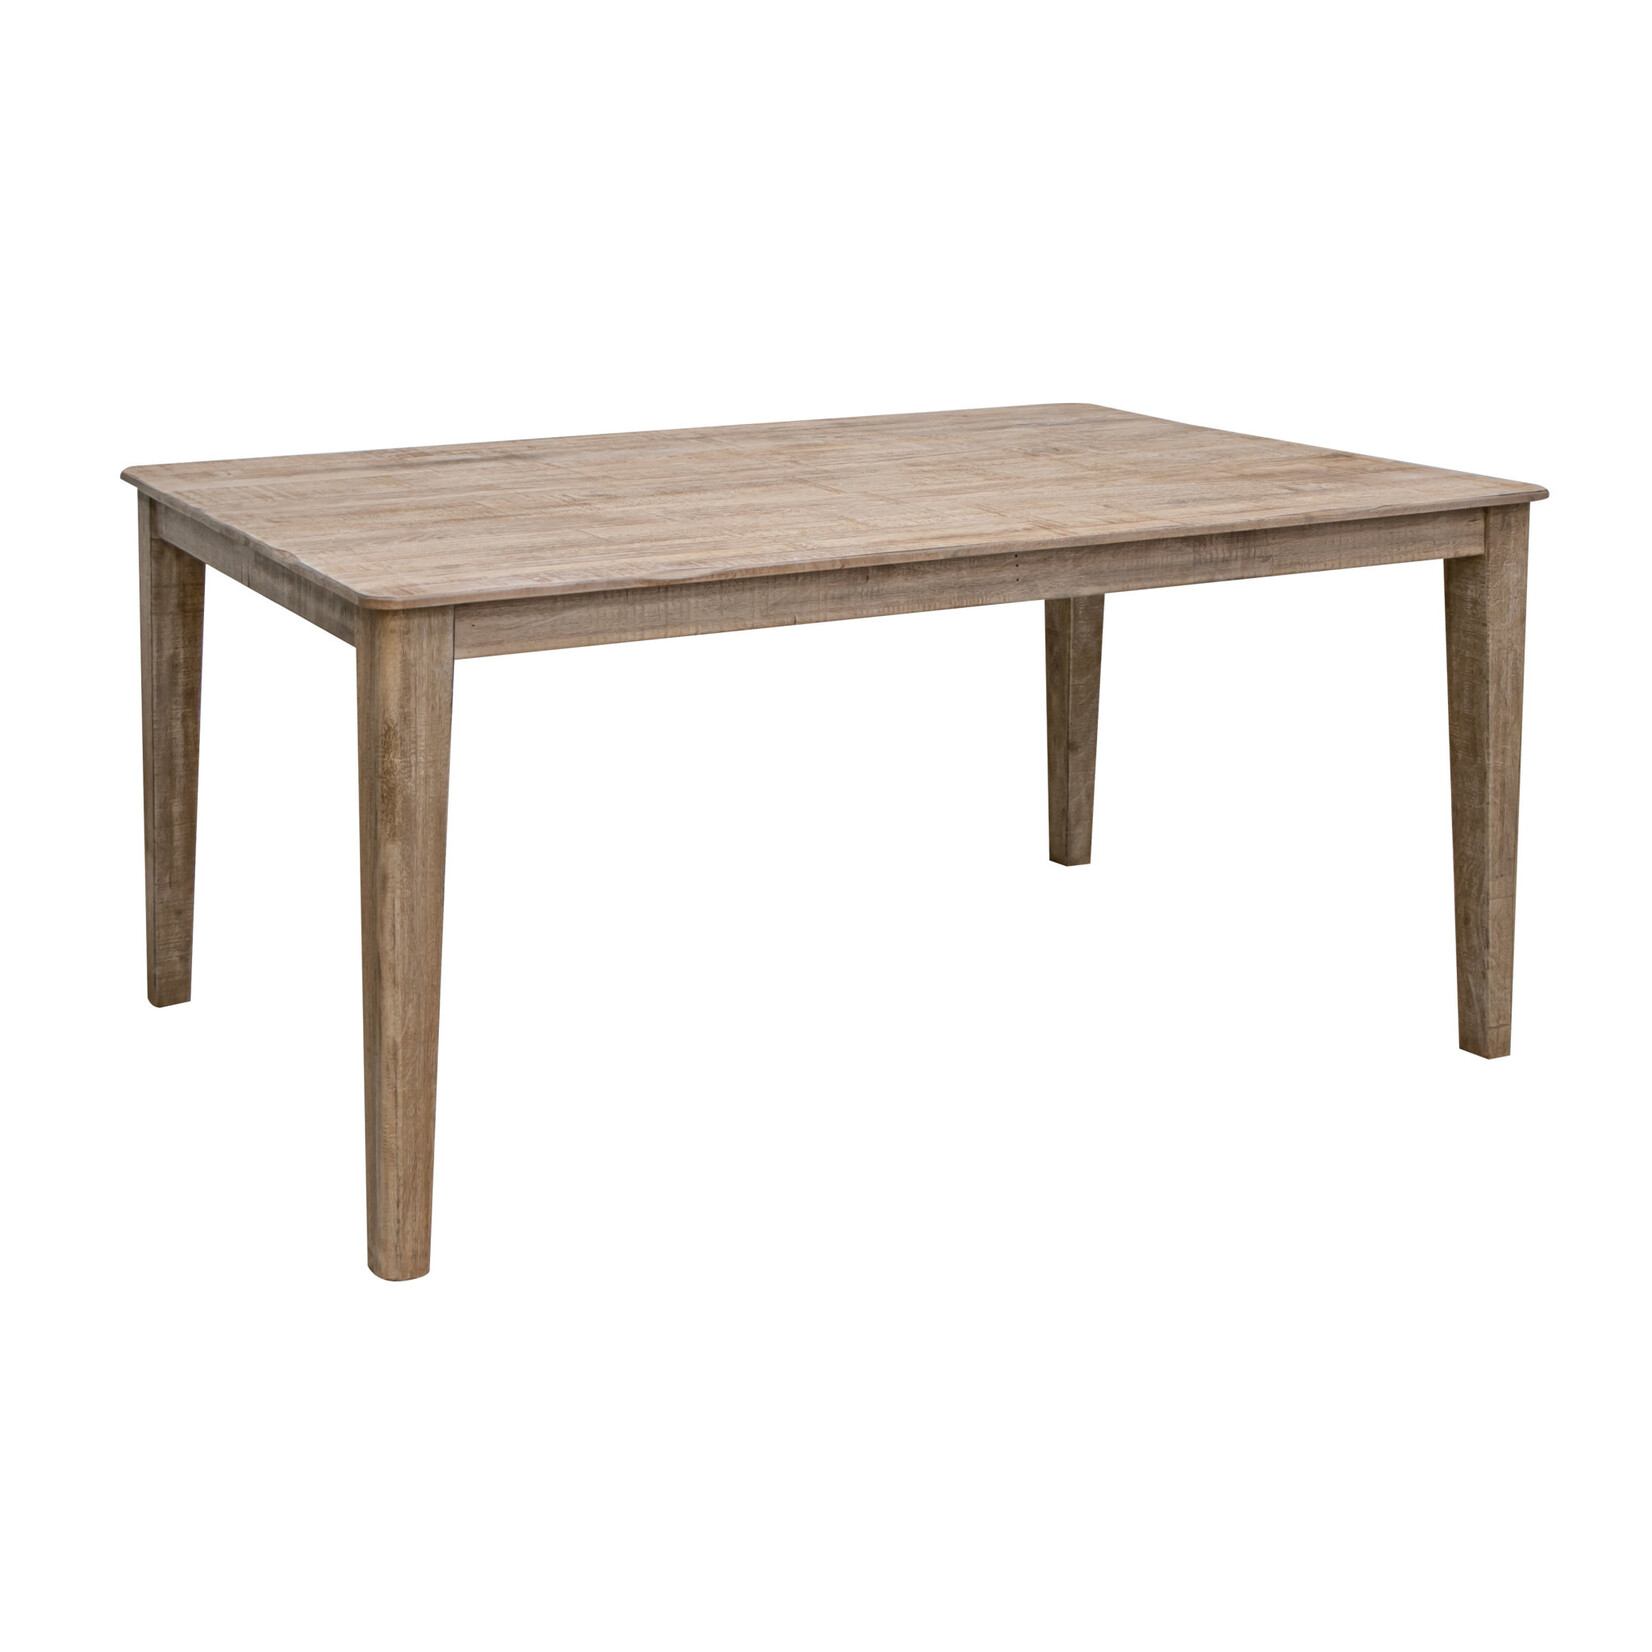 Sahara Rectangle Dining Table w/6 Upholstered Beige Chairs